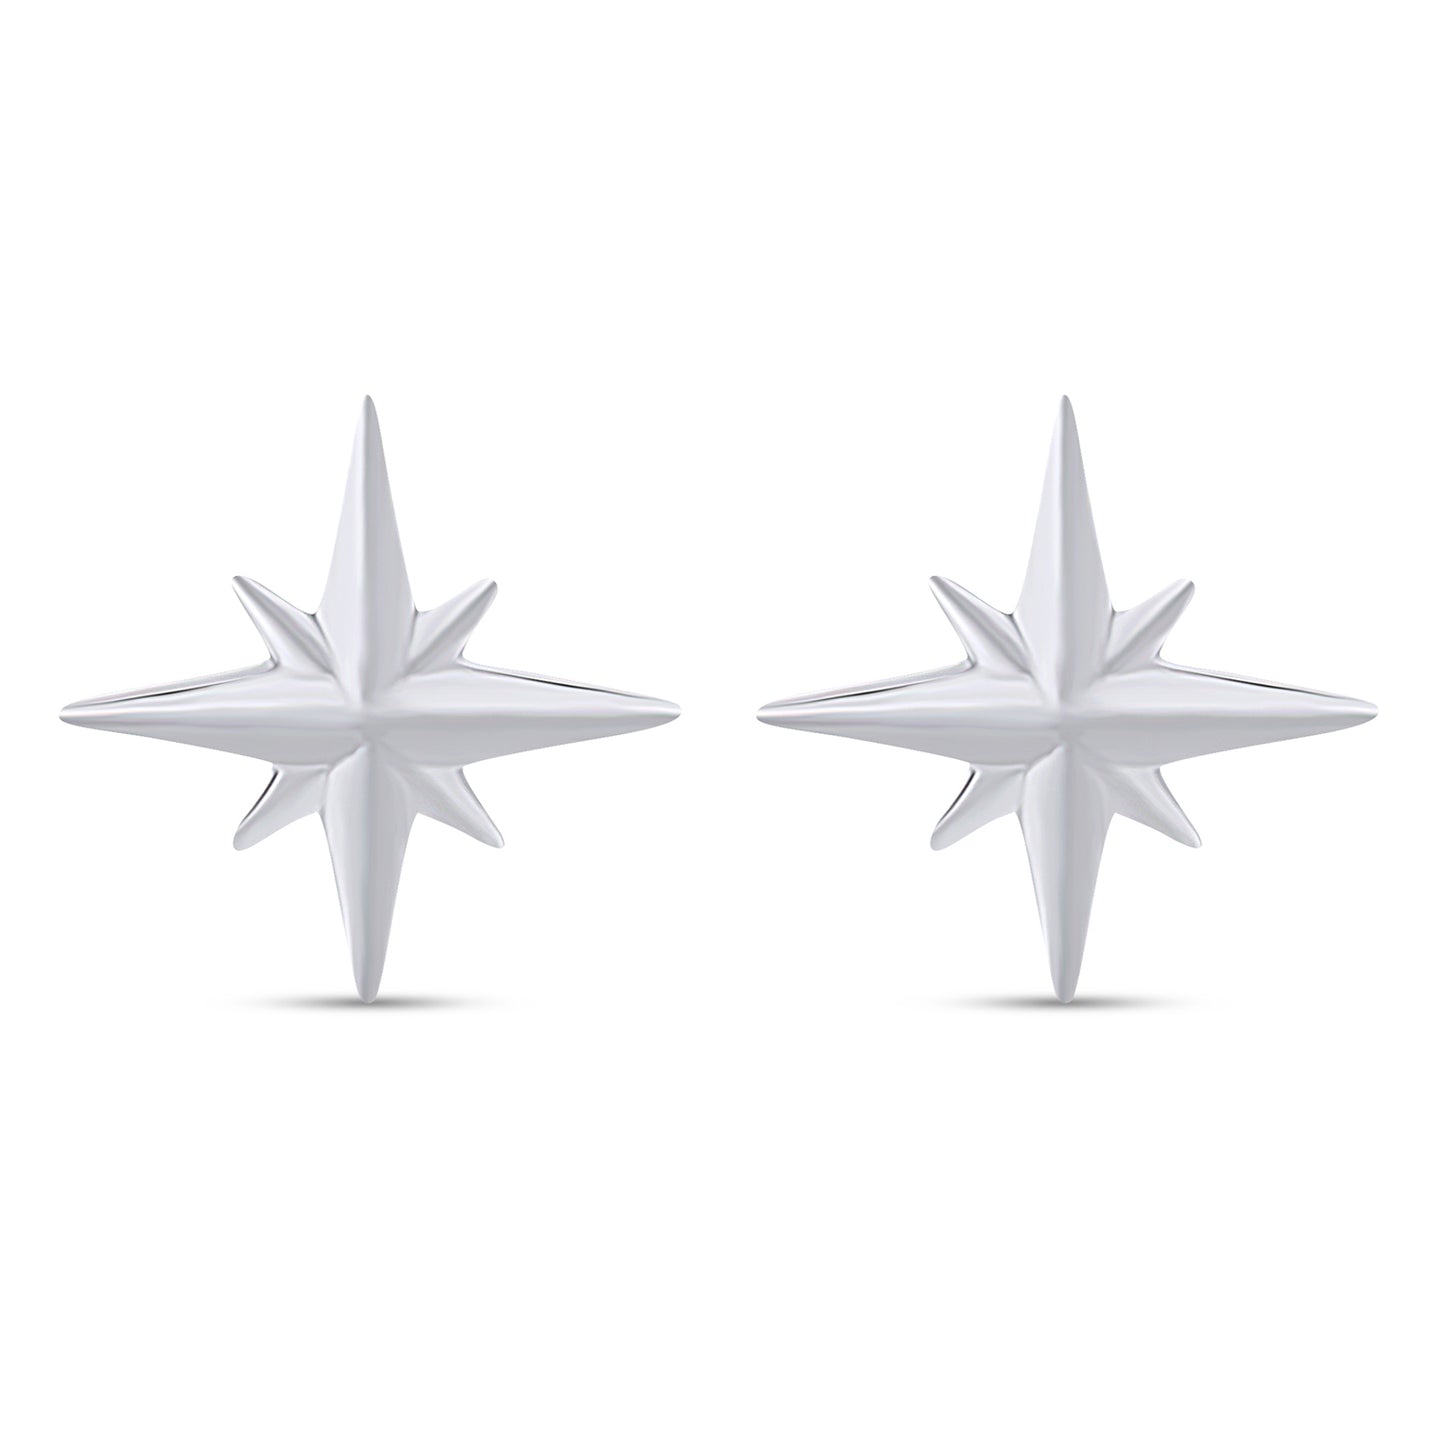 Load image into Gallery viewer, Dainty North Star Stud Earrings For Women In 925 Sterling Silver
